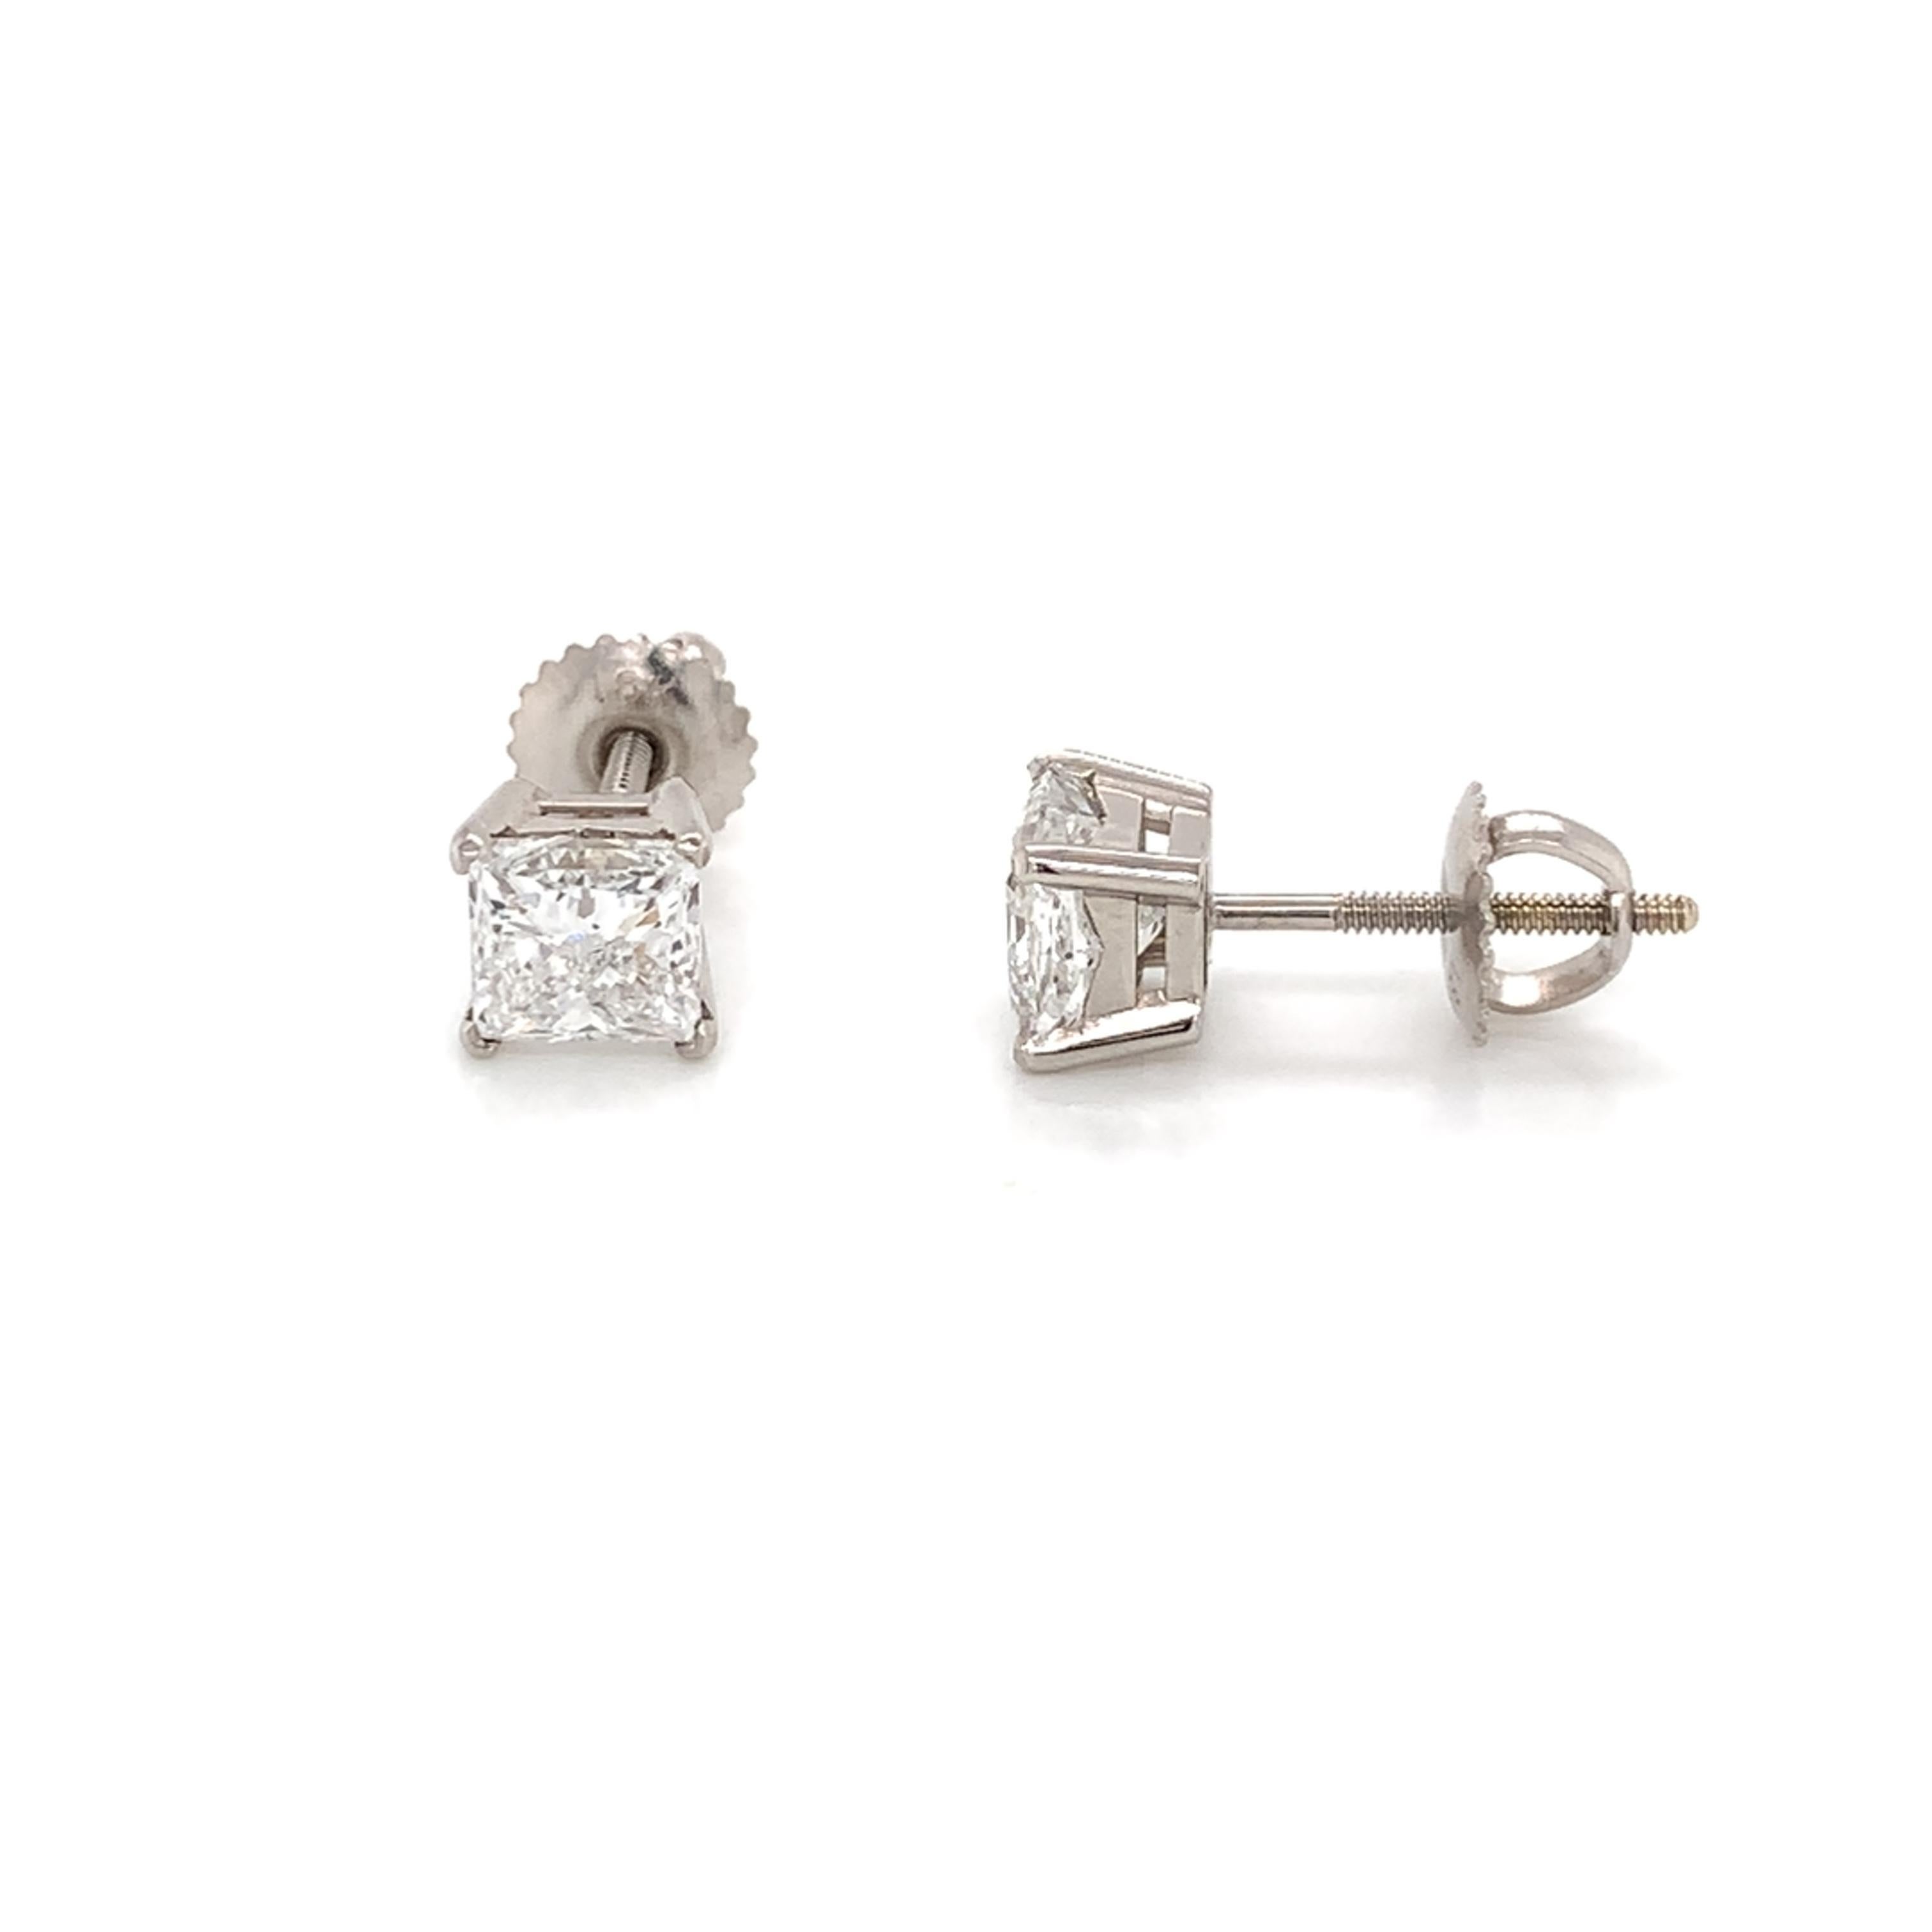 Princess Cut Diamond Studs made with real/natural GIA Certified Diamonds. Diamond Quantity: 2 (Princess Cut Diamonds). Total Weight: 1.90 carats. Diamond Color: E. Clarity: I1. Mounted on 18kt white gold screw-back setting.